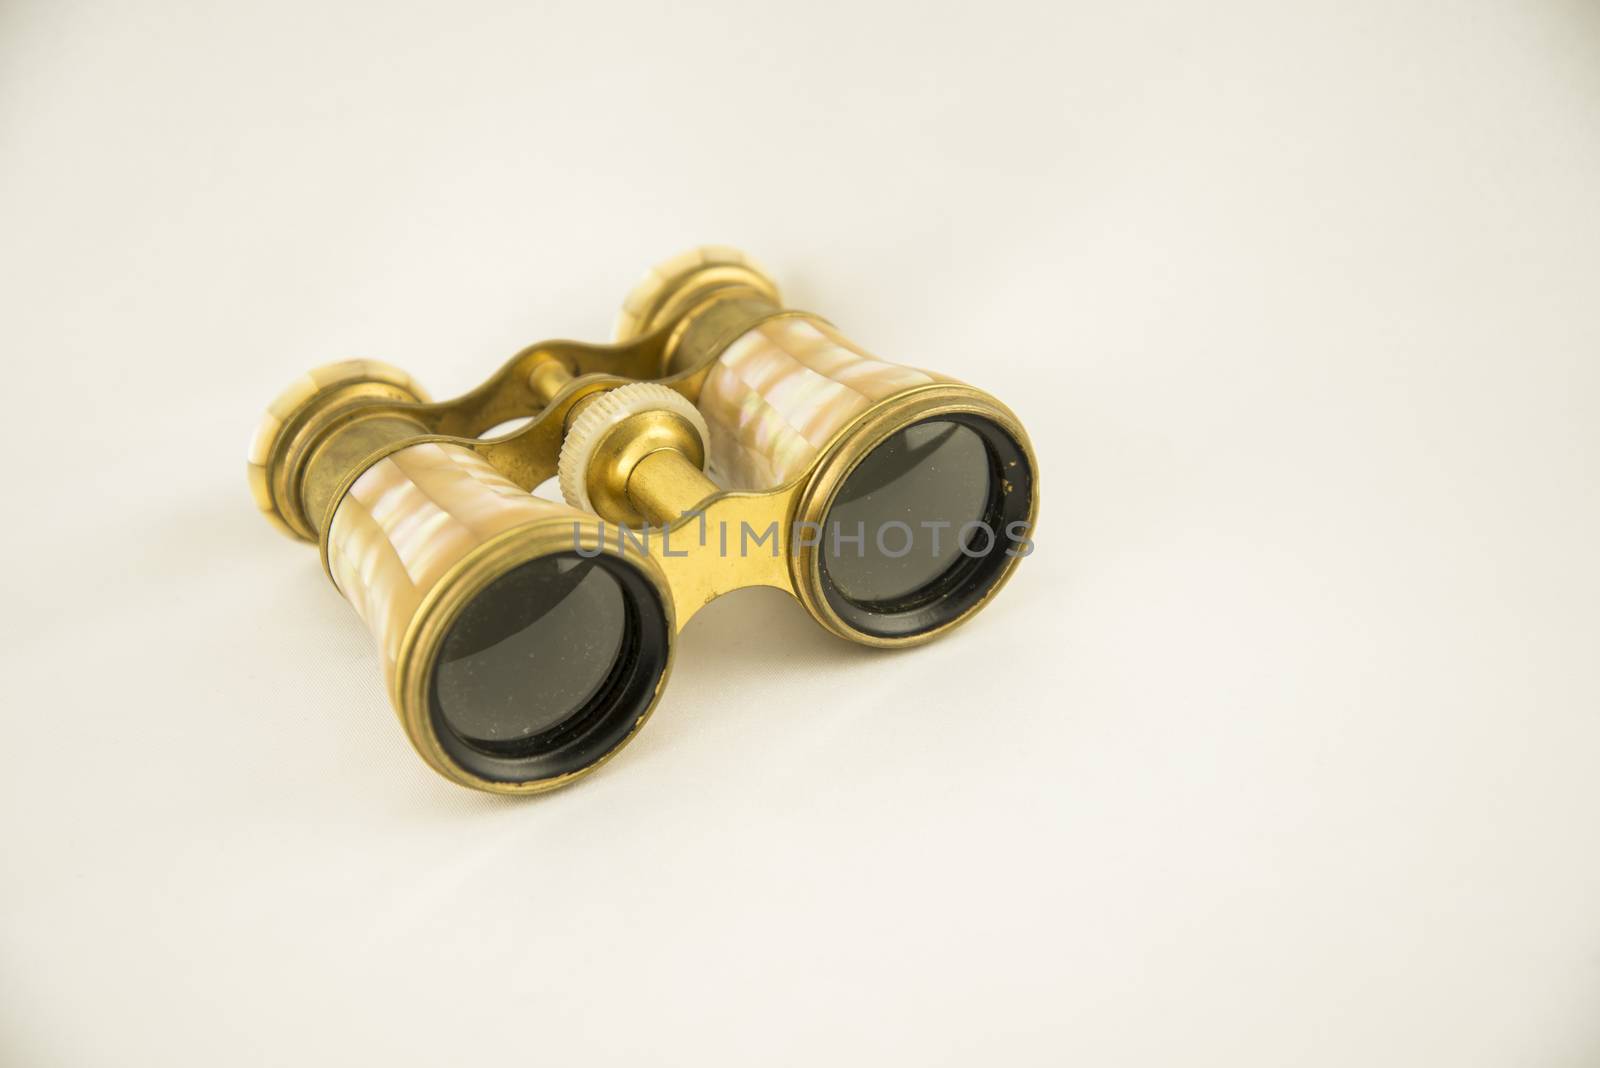 Old opera binoculars isolated on a white background by edella